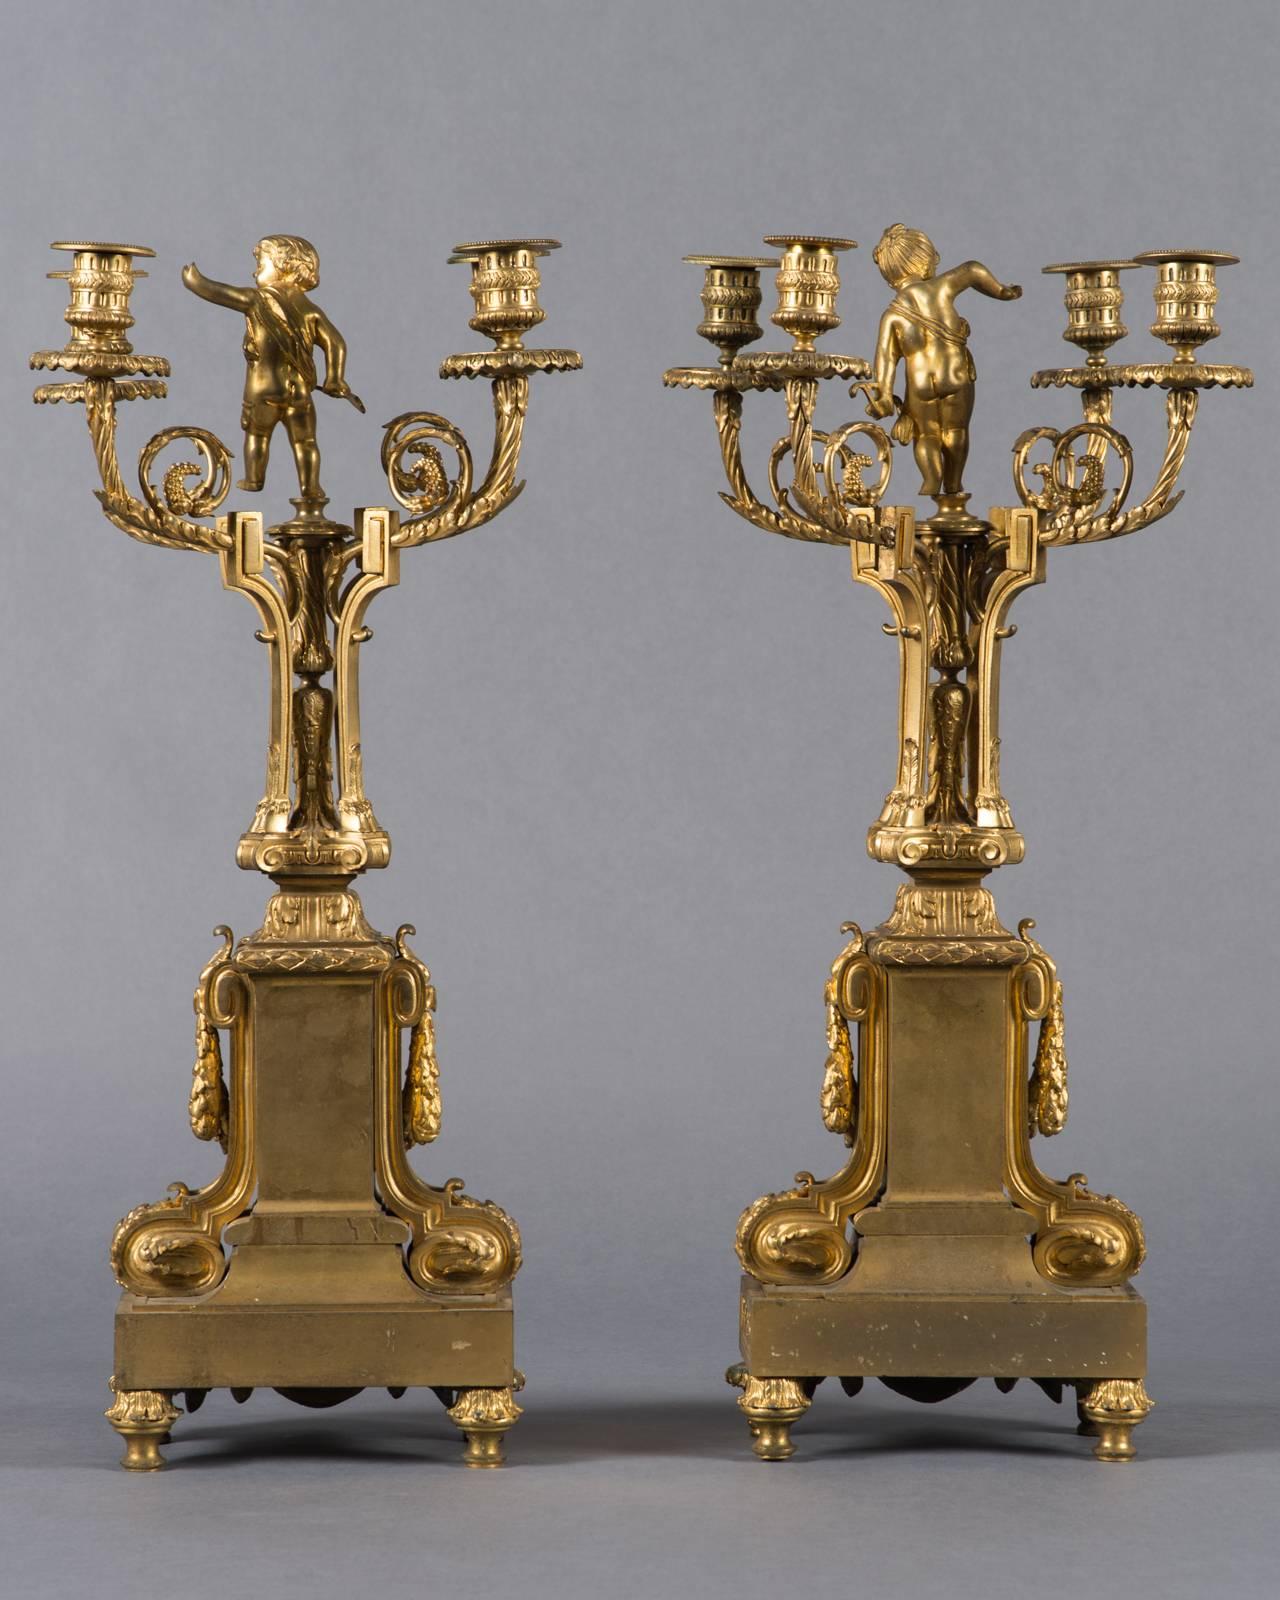 Pair of 19th Century French Gilt Bronze Four-Branch Figural Candelabras For Sale 5